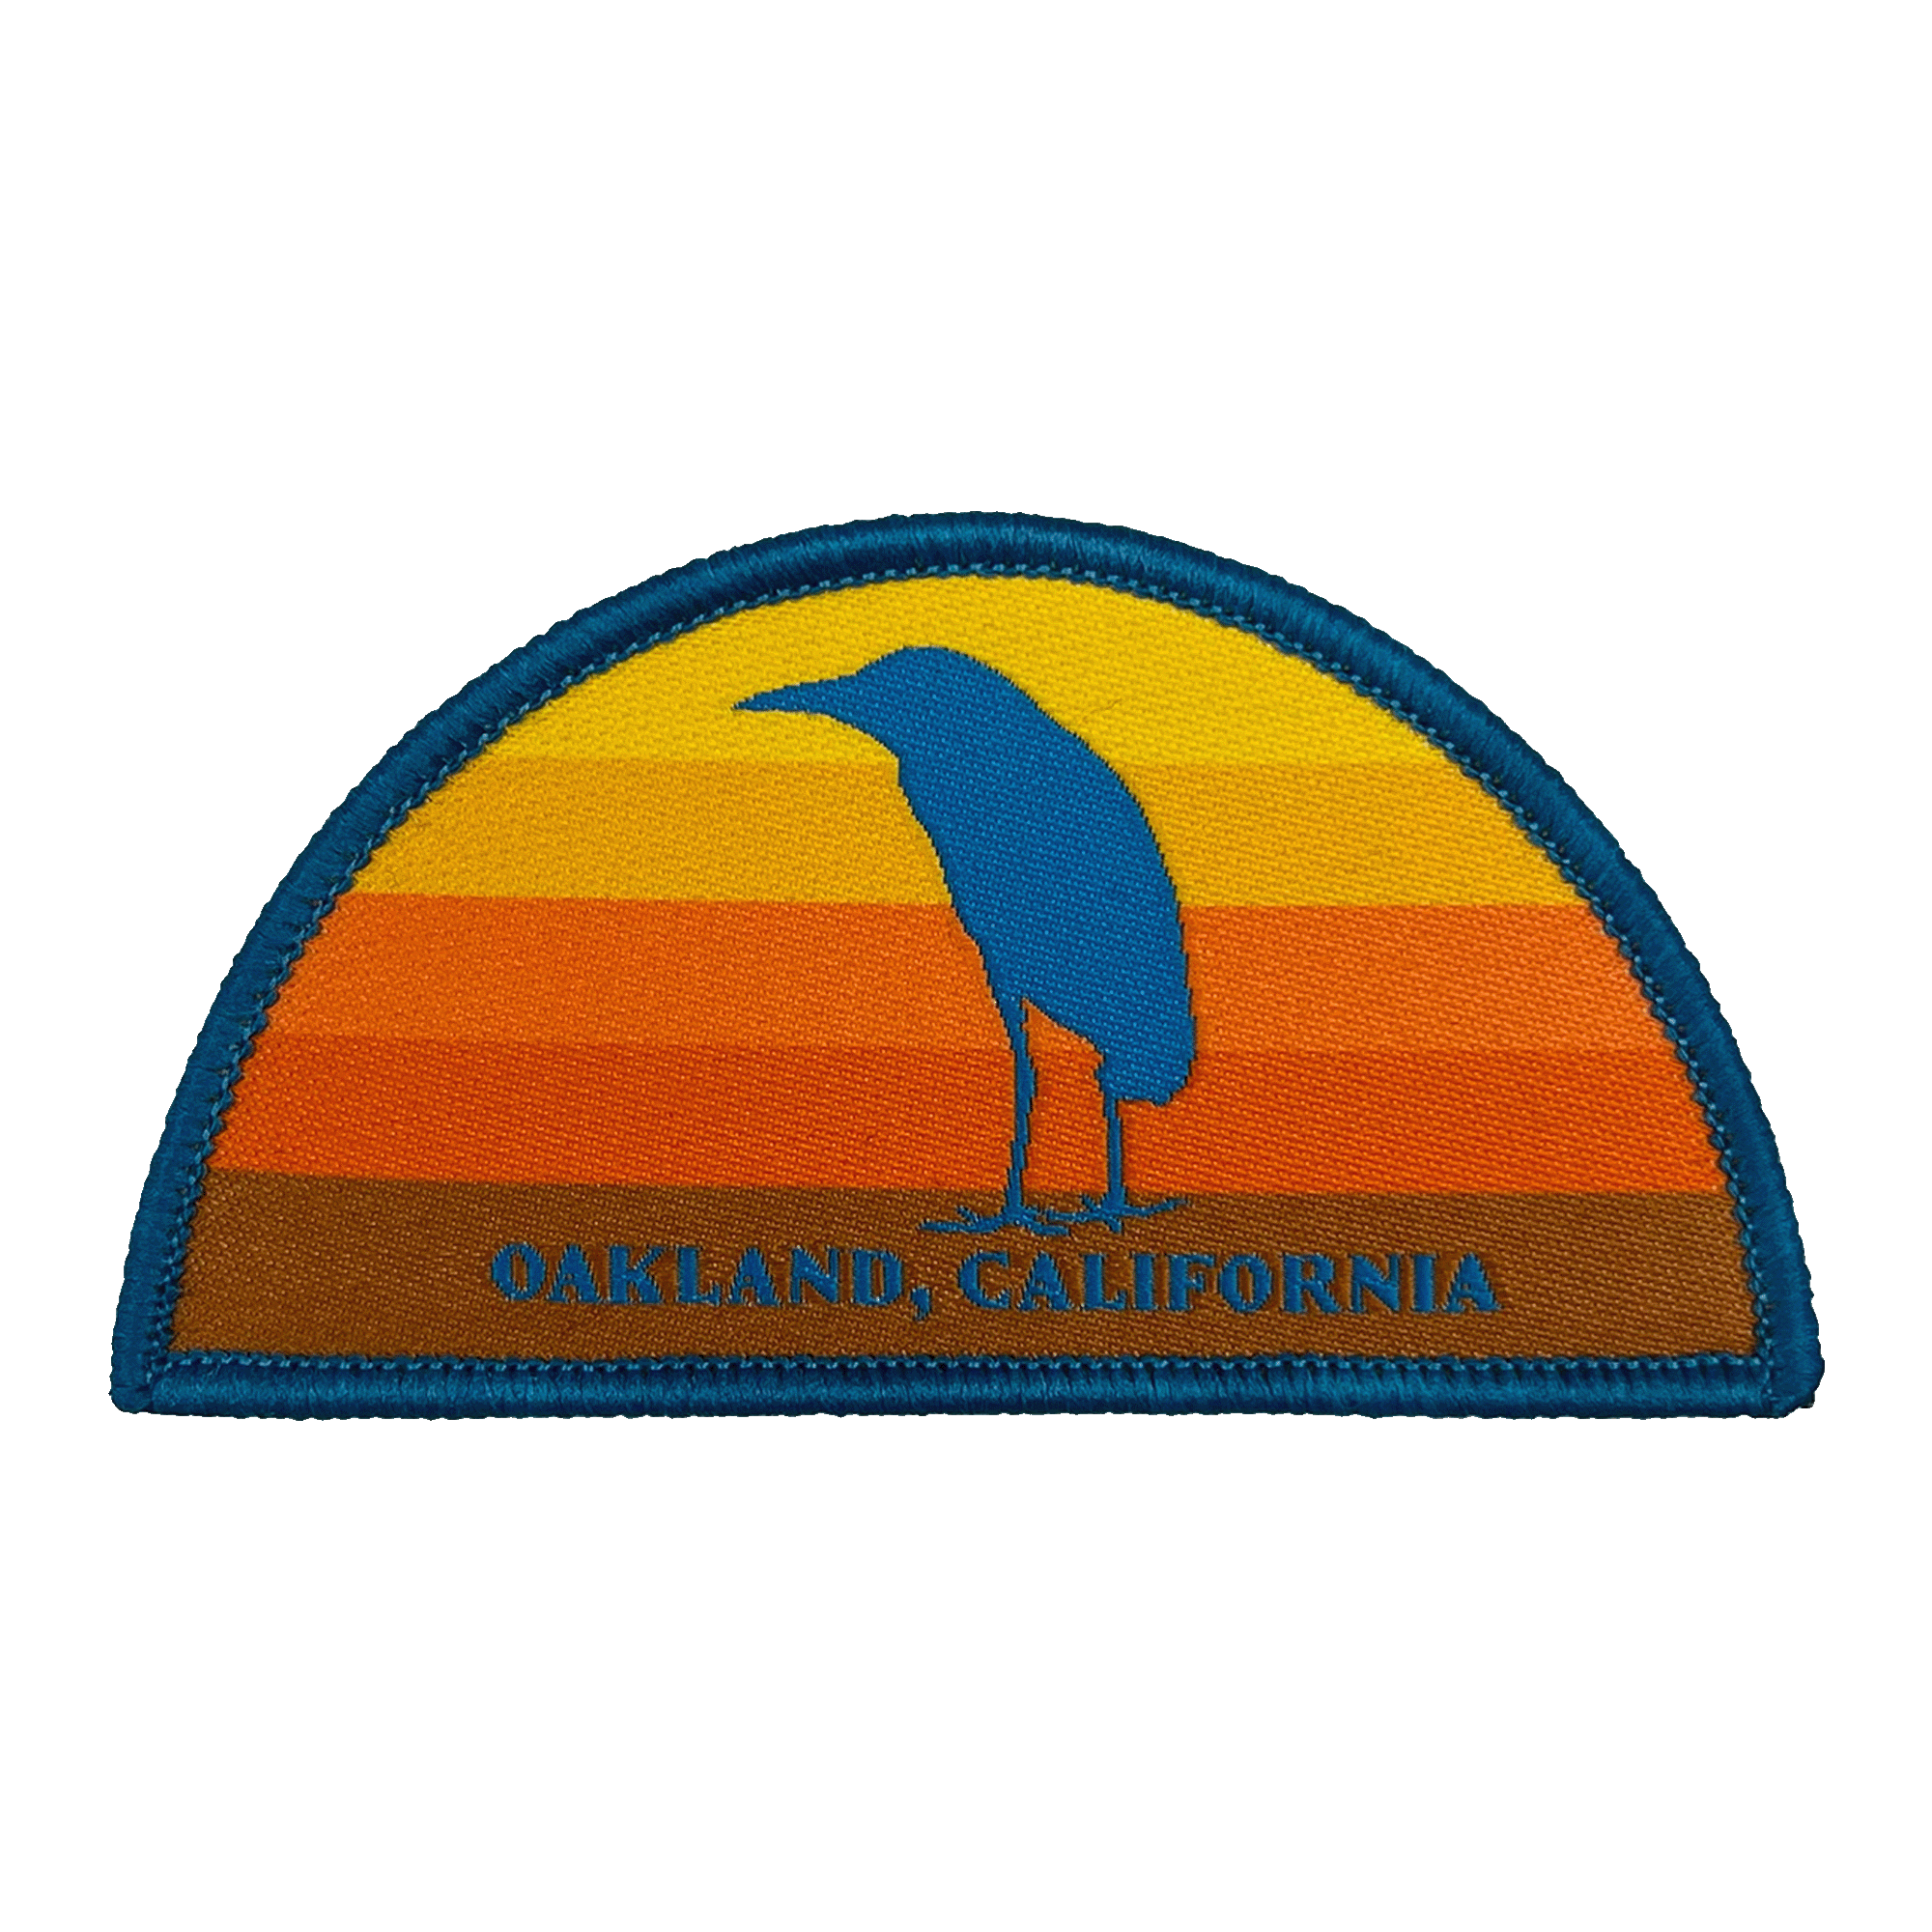 Multi-color iron-on half circle patch with night heron at sunset with Oakland, California wordmark.